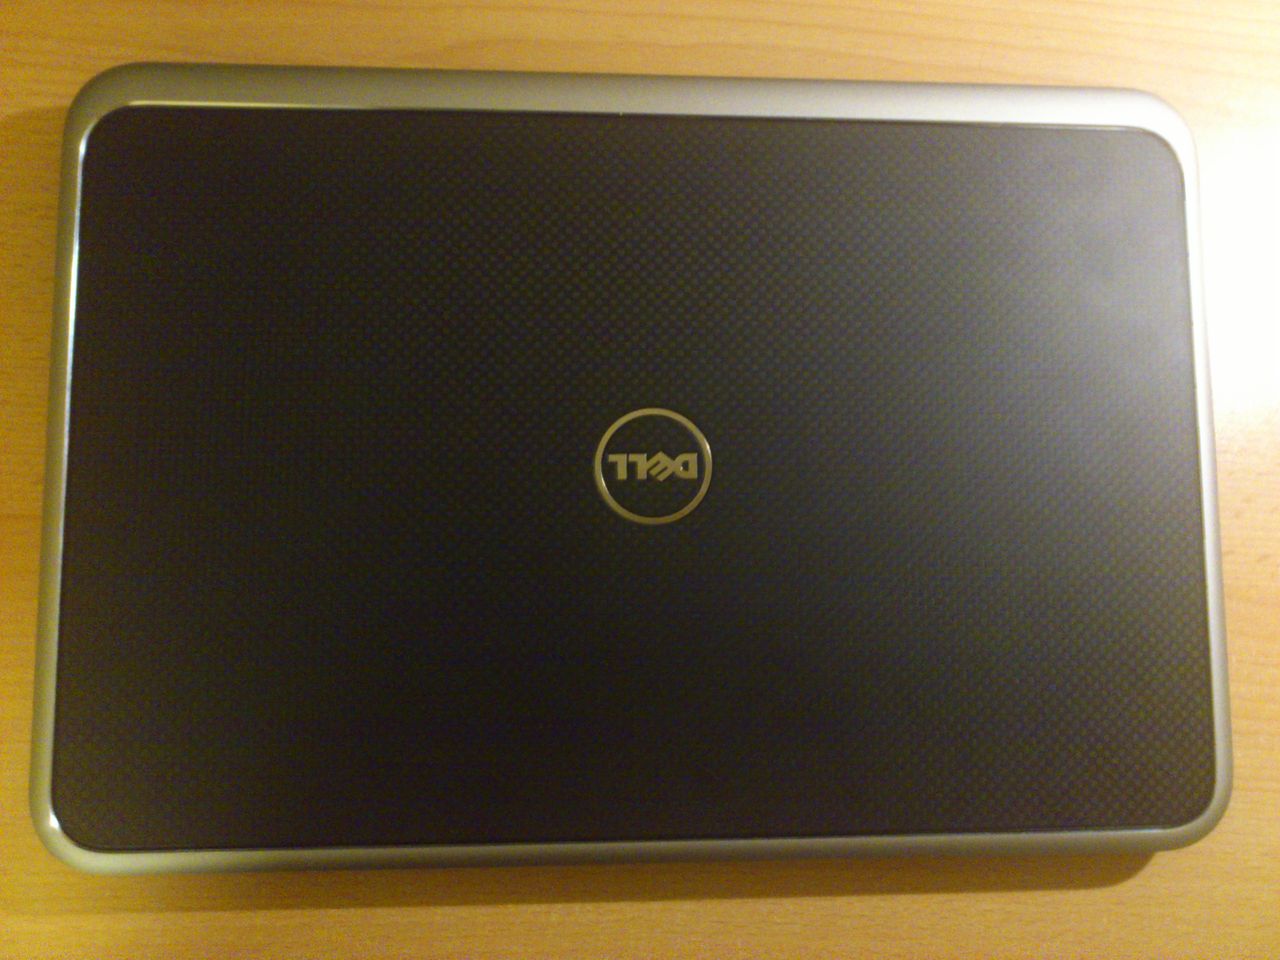 Dell XPS 12 Duo - Tabletobook